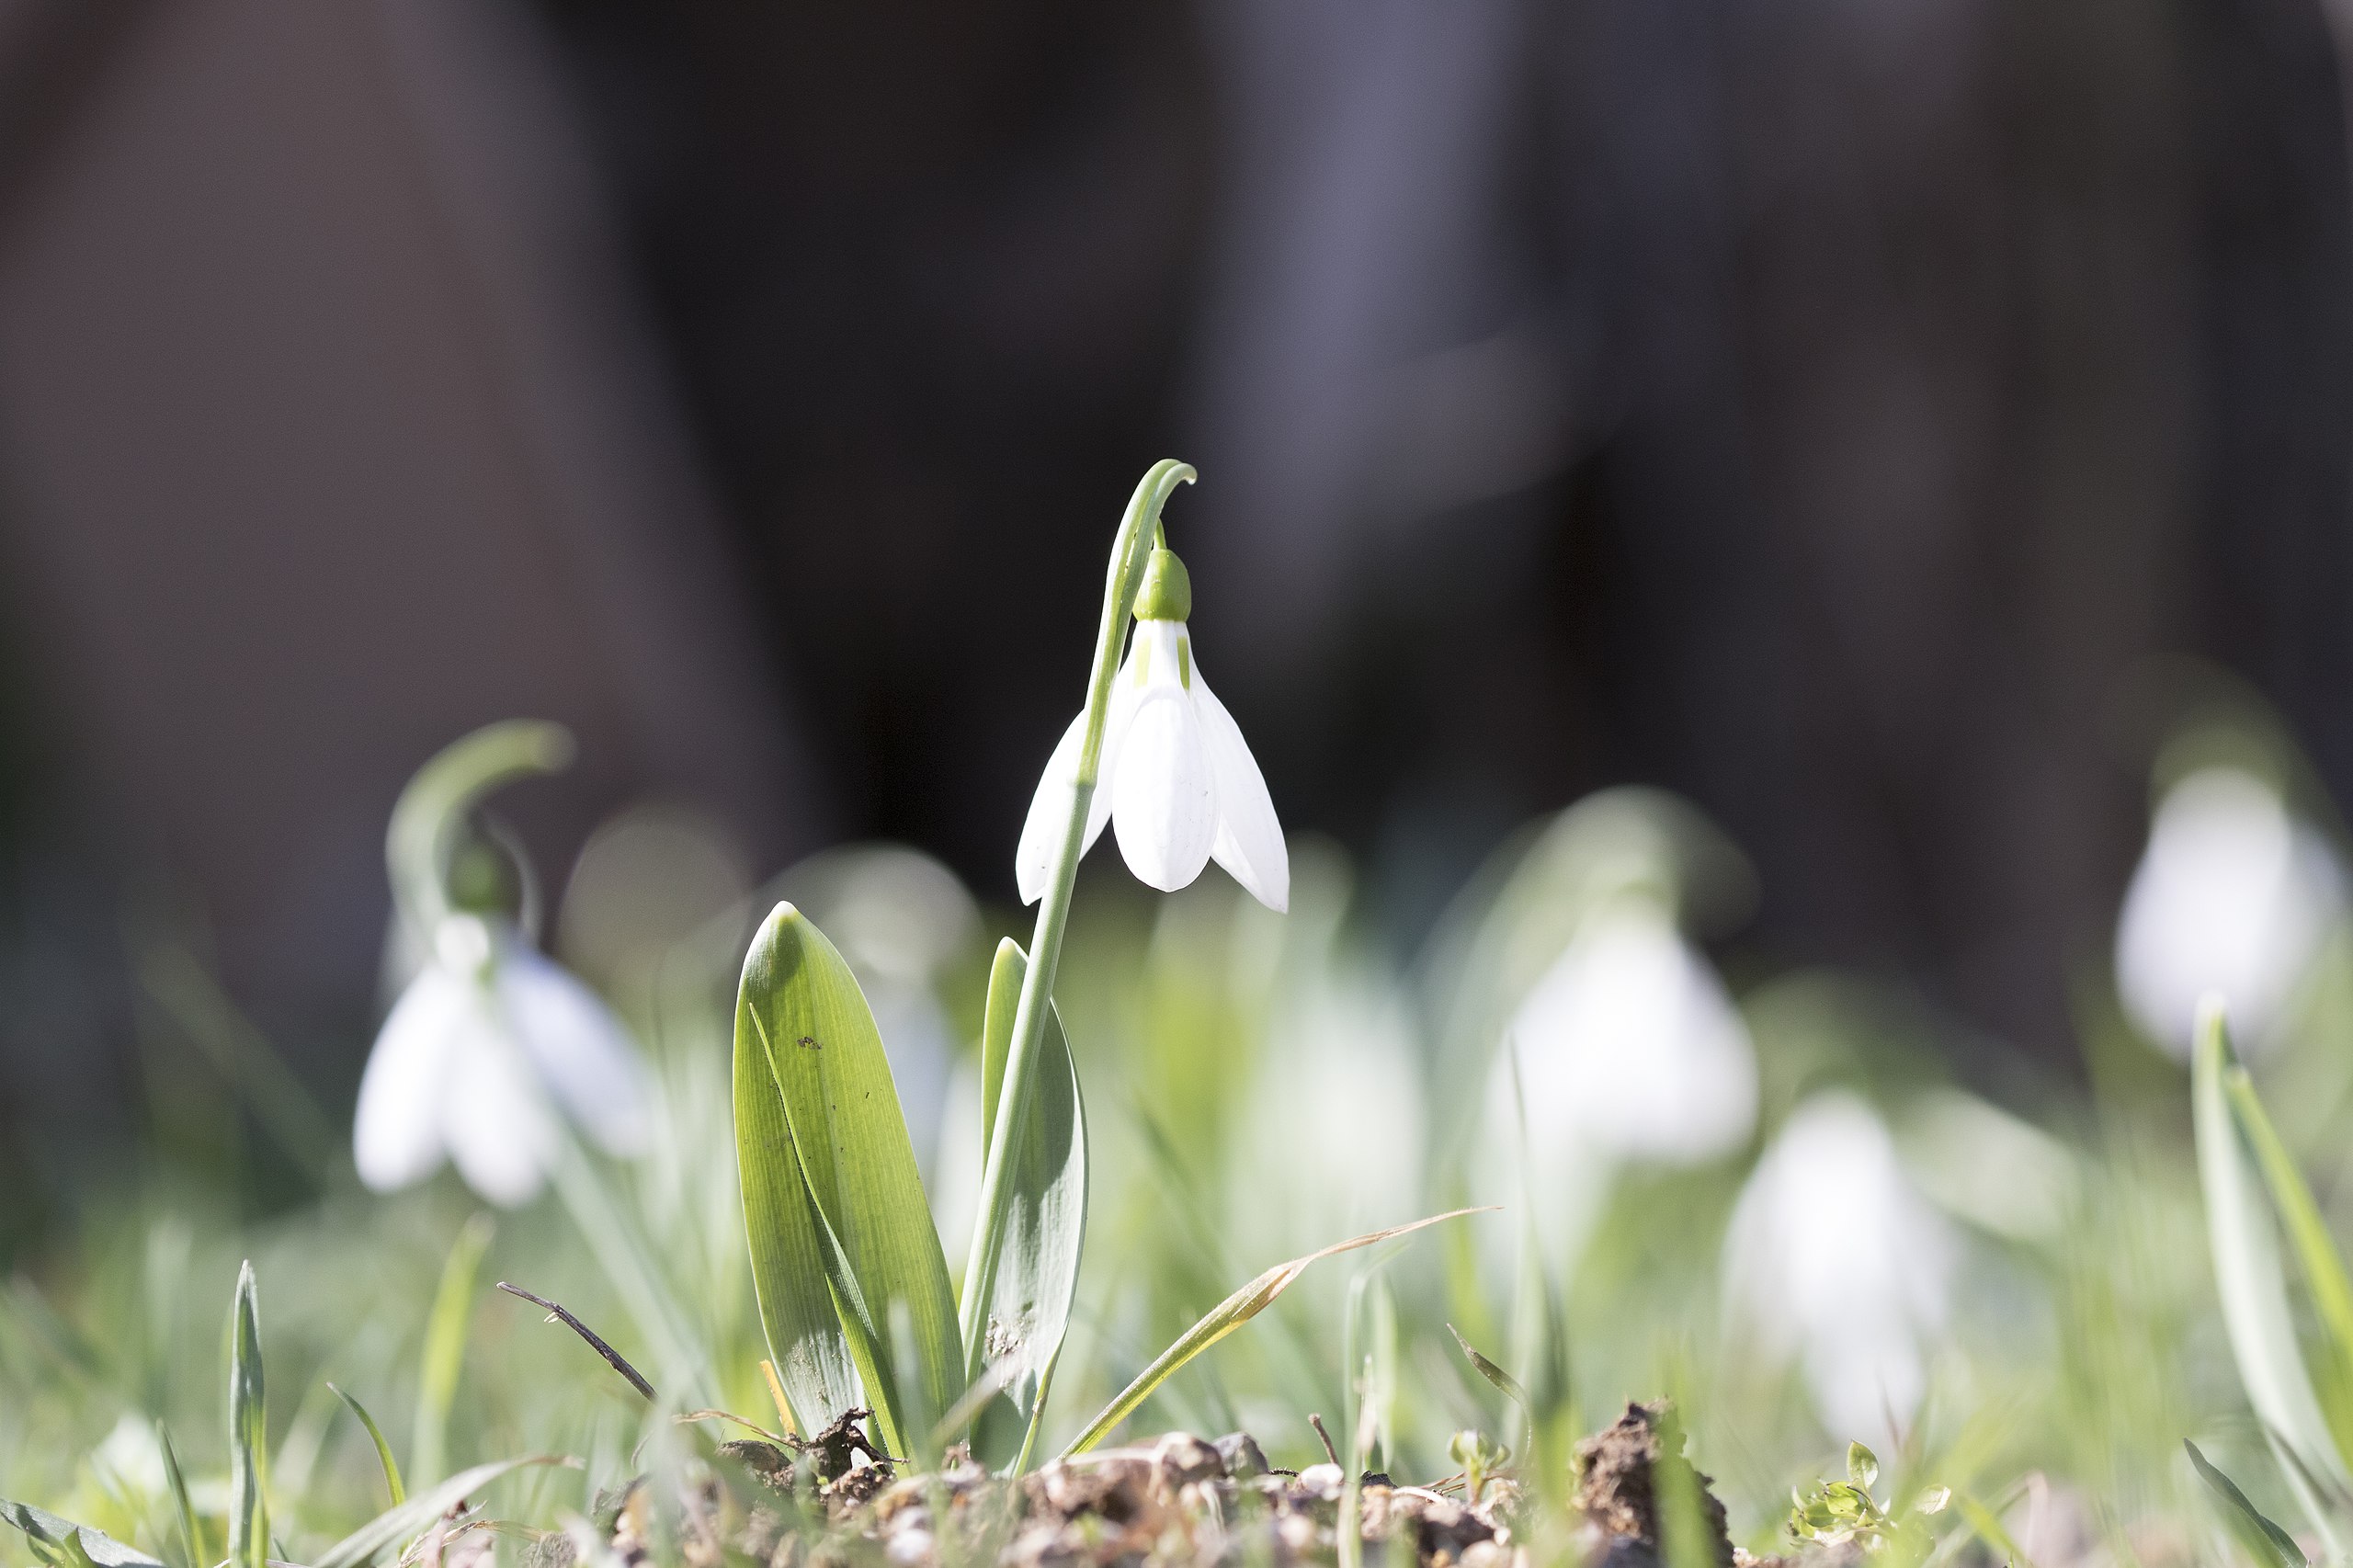 Snowdrops acknowledge the arrival of Swedish spring. (Photo: Zeynel Cebeci/CC BY-SA 4.0)